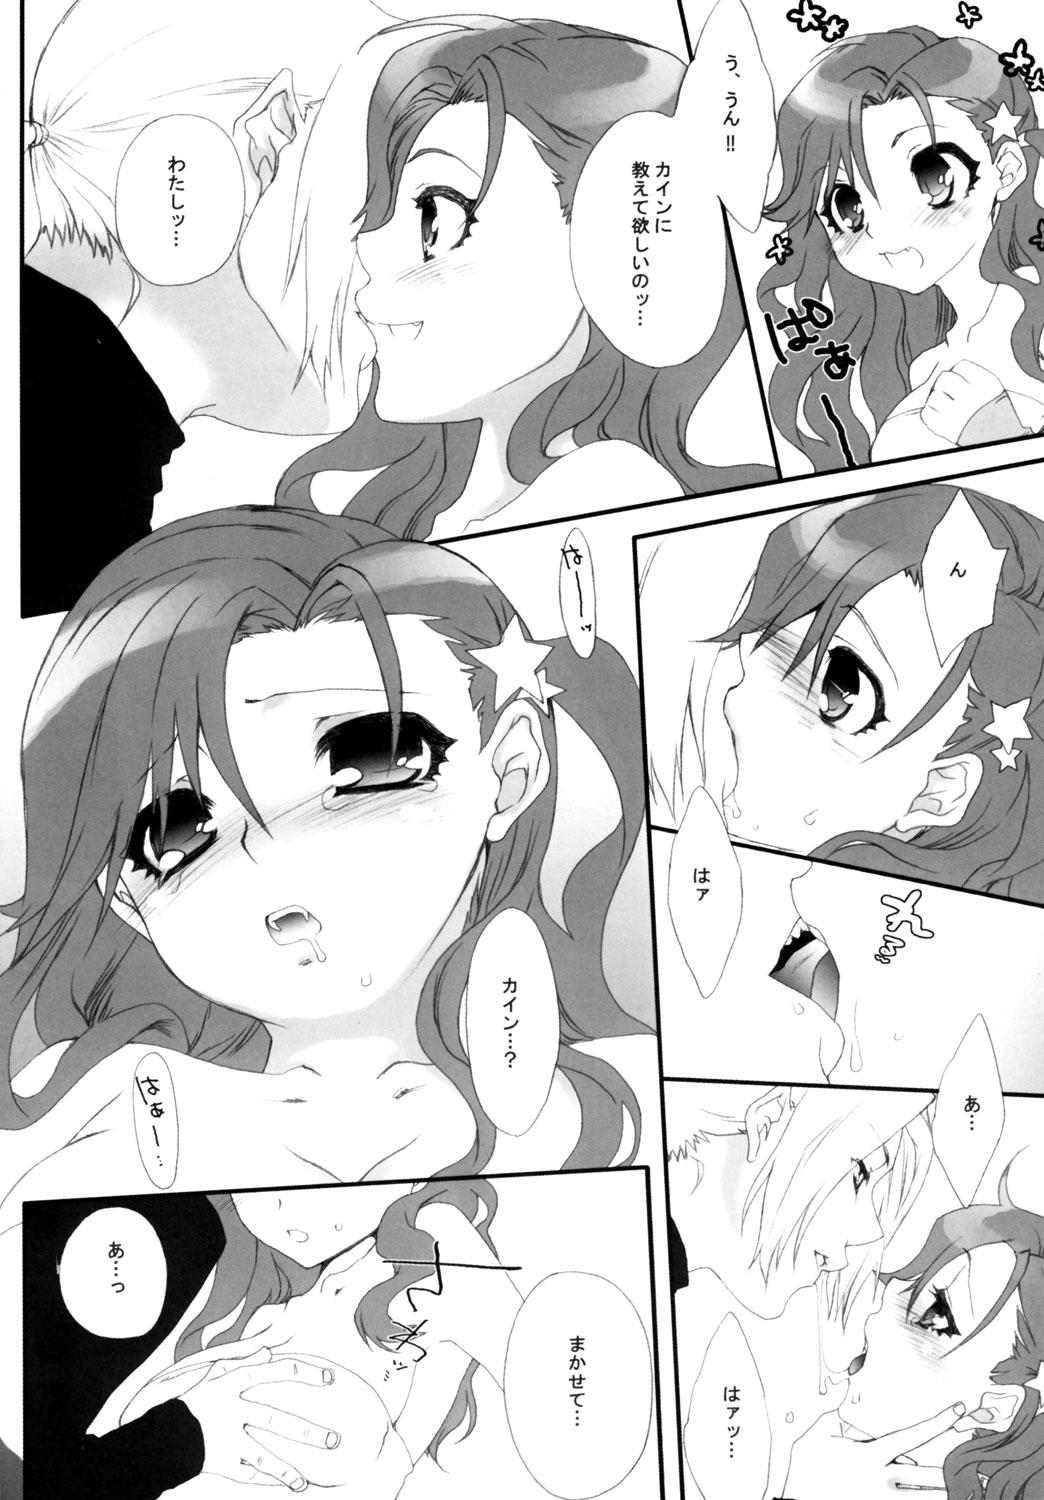 Leche Cure Green - Final fantasy iv Maid - Page 7